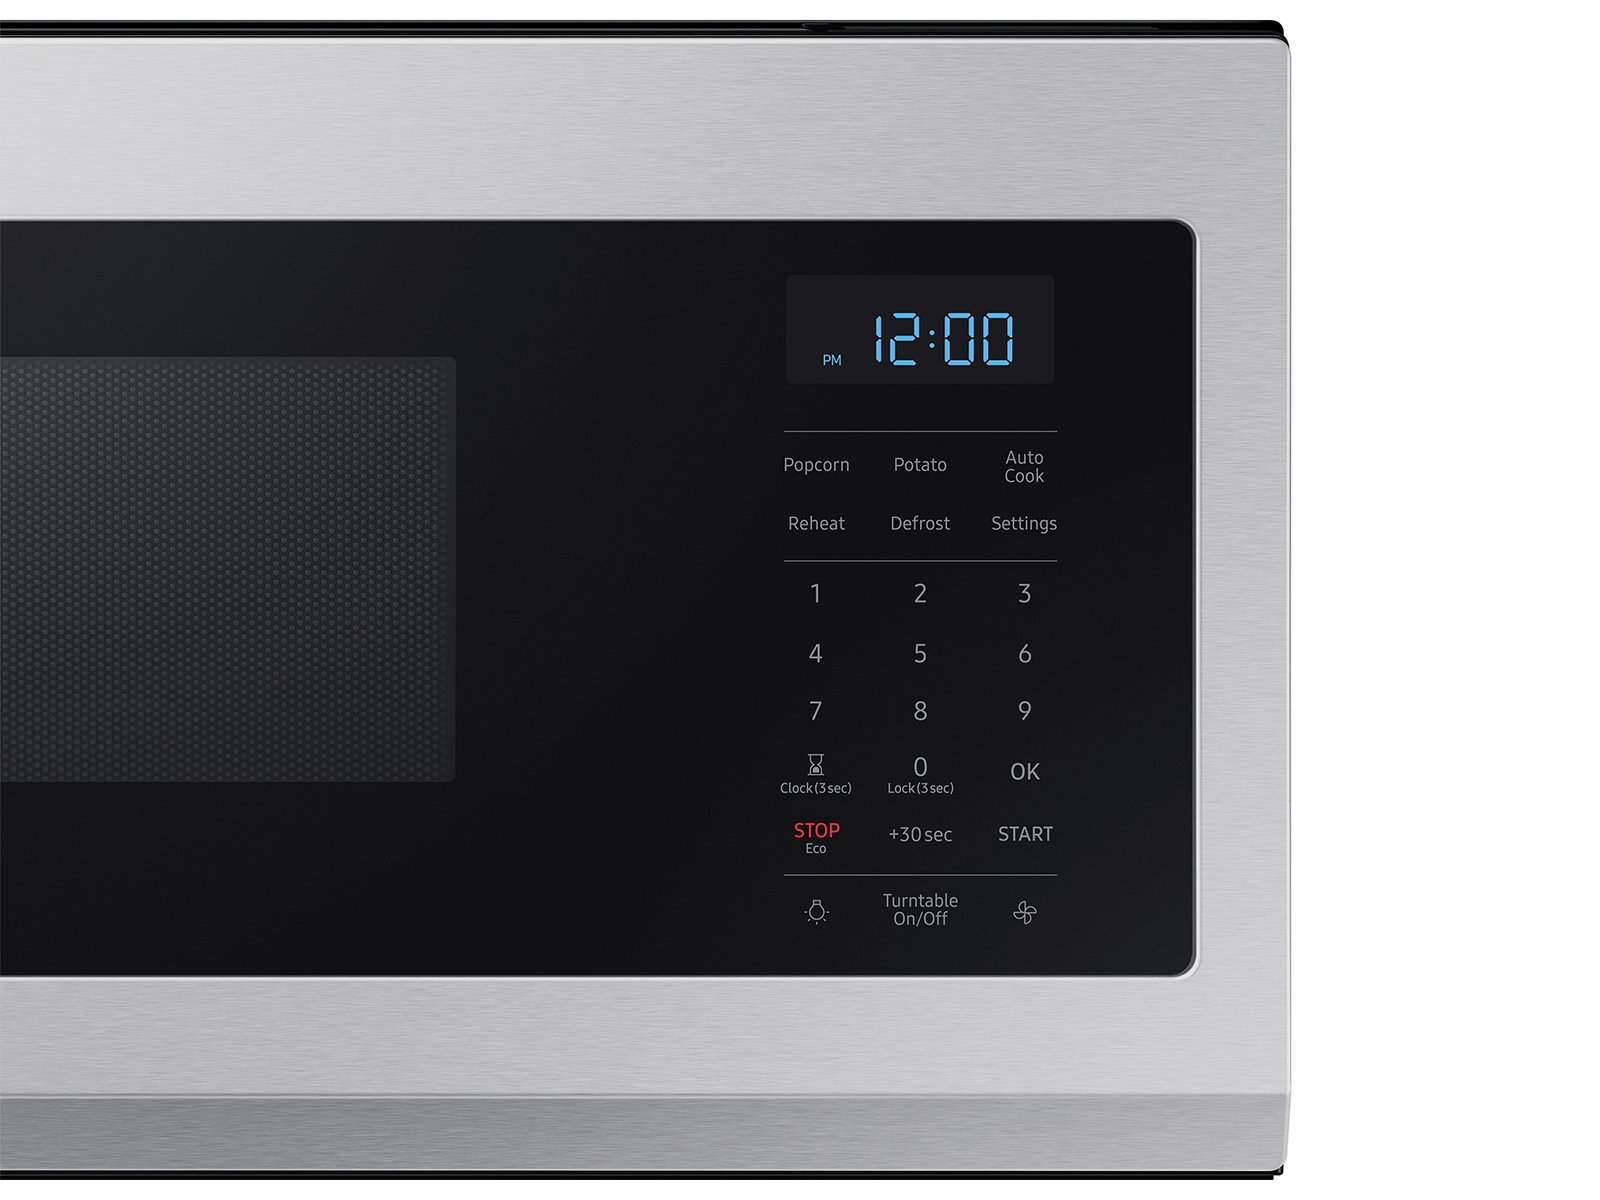 https://image-us.samsung.com/SamsungUS/home/home-appliances/microwaves/pdp/me11a7510ds-aa/gallery/ME11A7510DS_11_Silver_SCOM.jpg?$product-details-jpg$